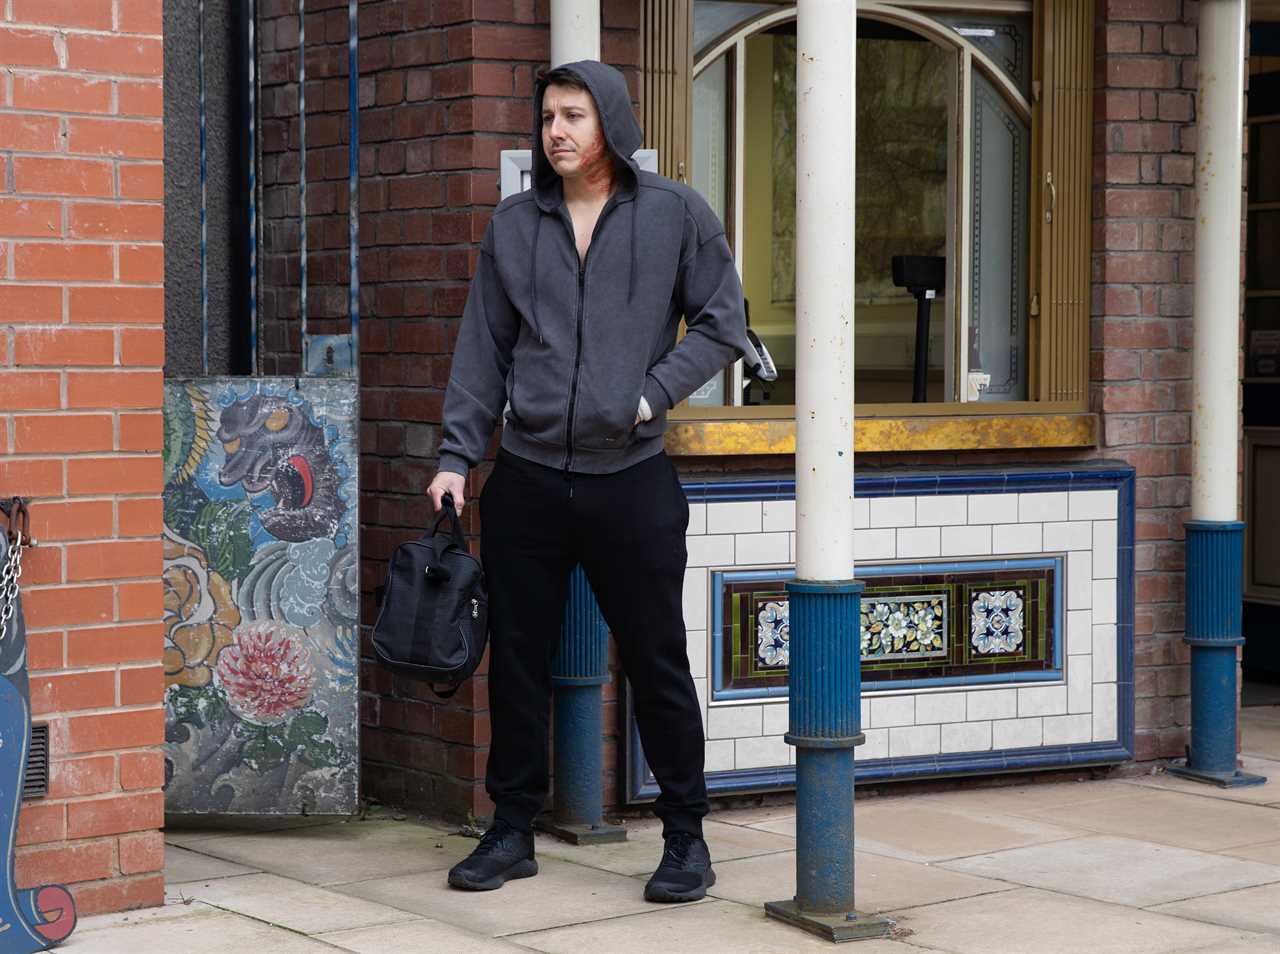 Ryan Connor gets tragic news after acid attack in Coronation Street